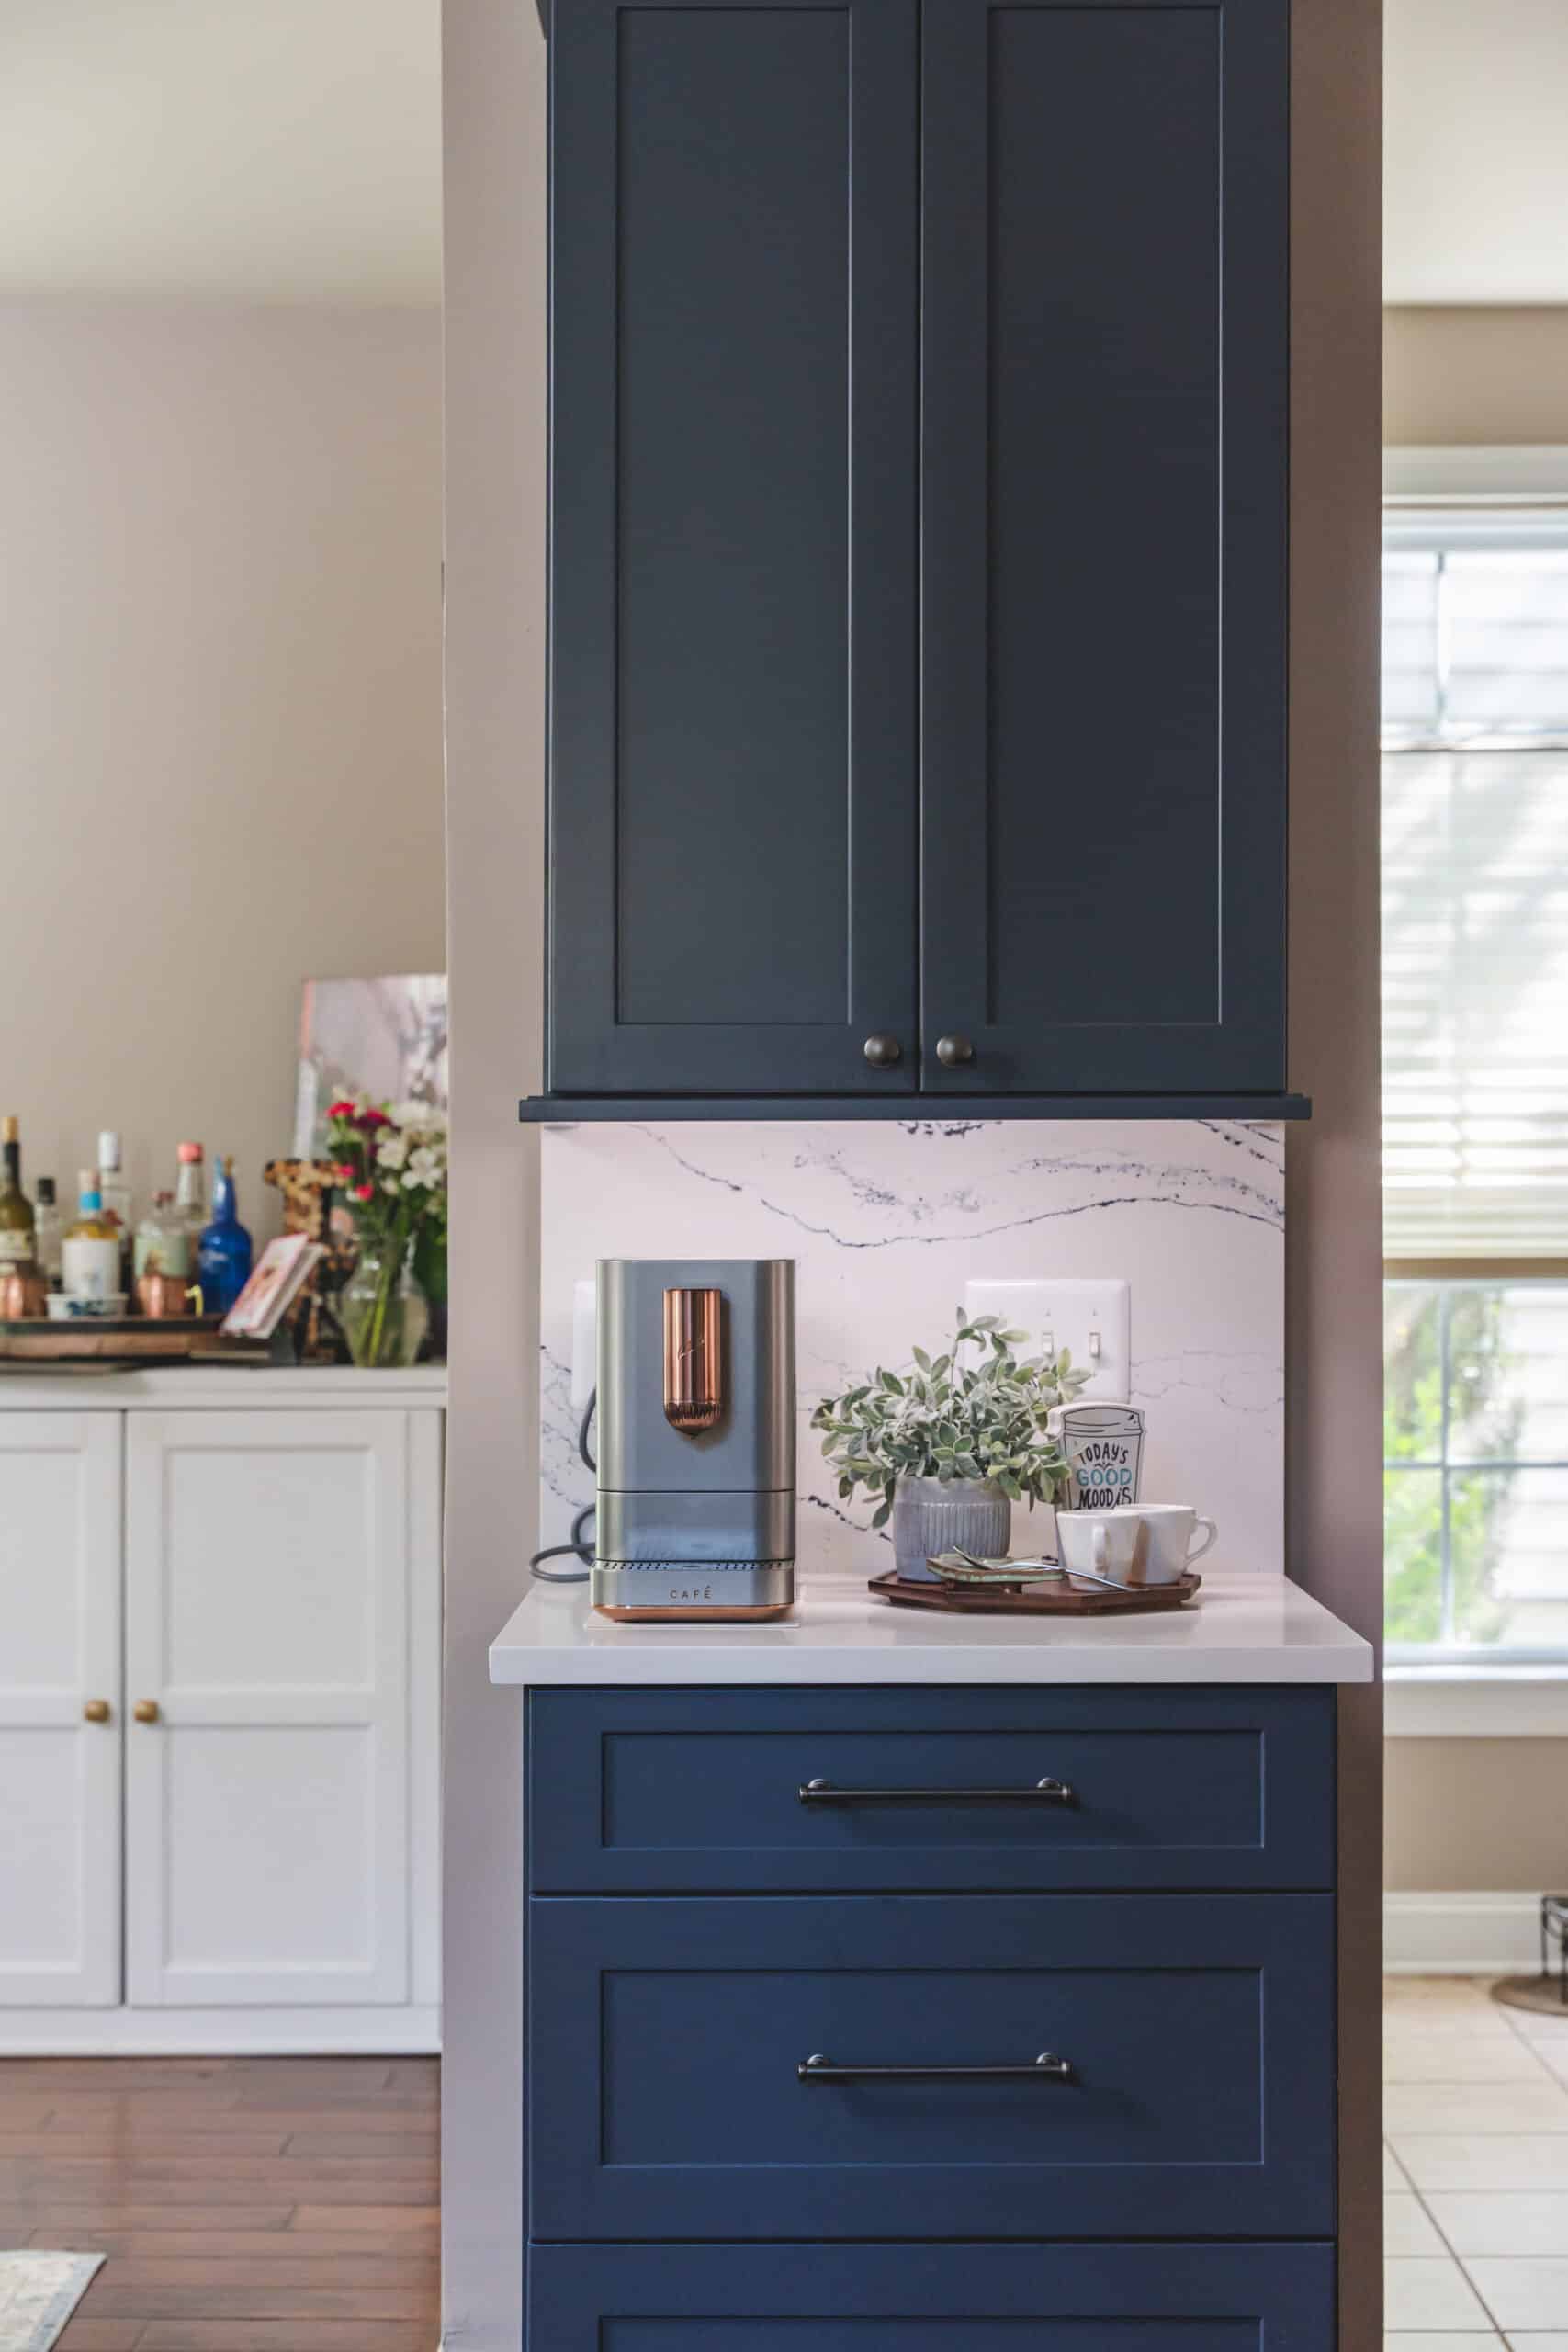 A kitchen with dark blue cabinets and a white countertop